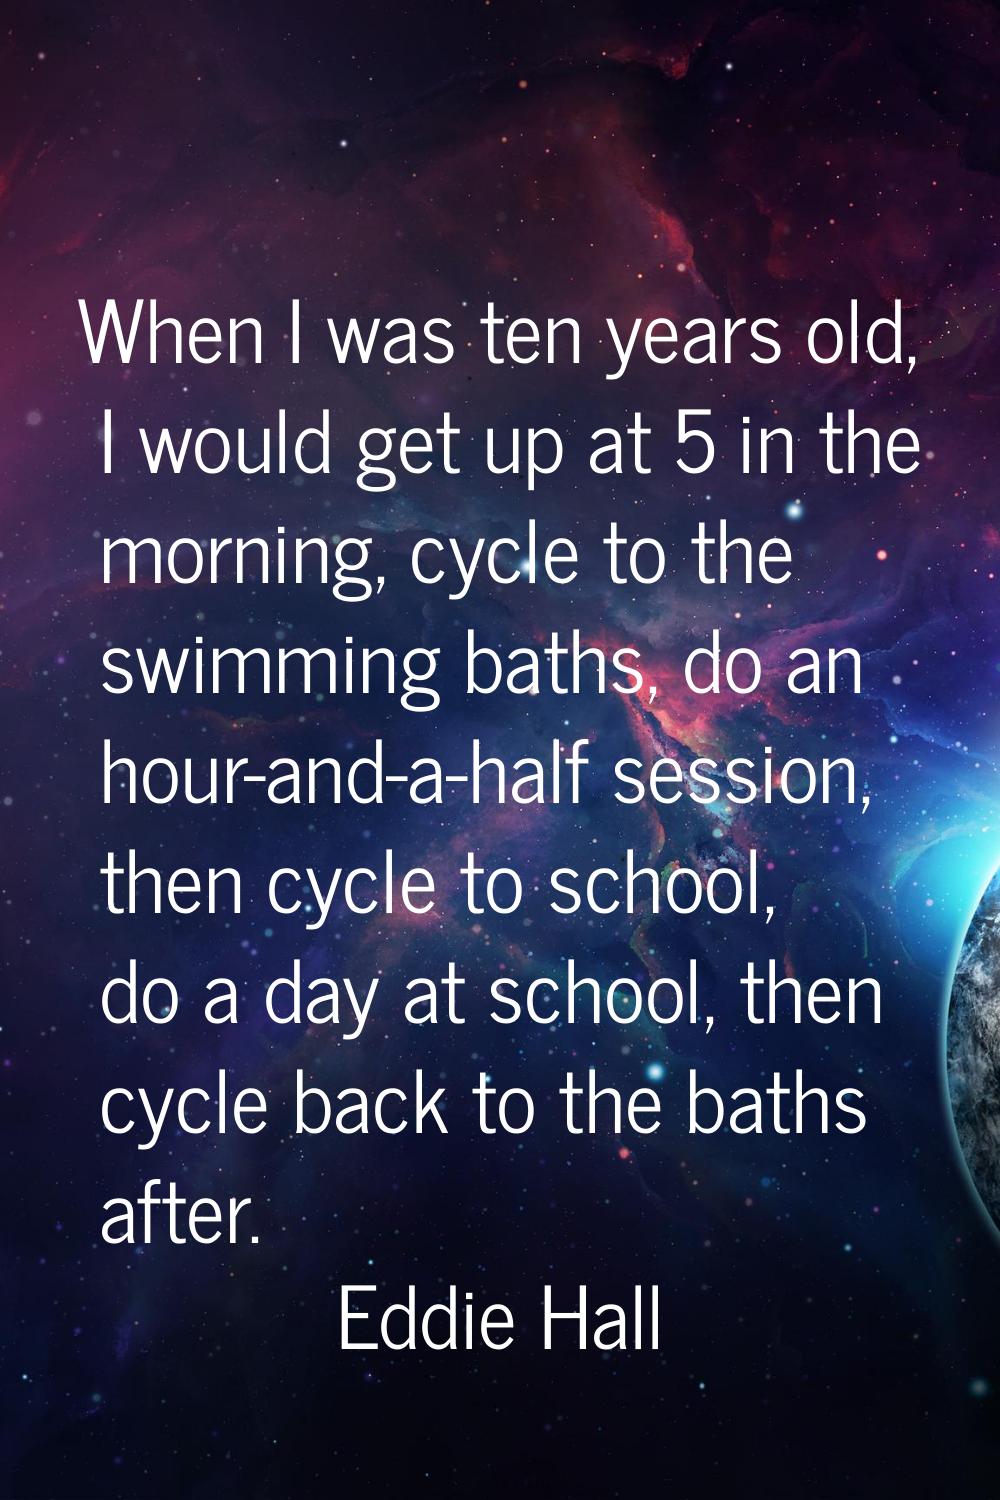 When I was ten years old, I would get up at 5 in the morning, cycle to the swimming baths, do an ho